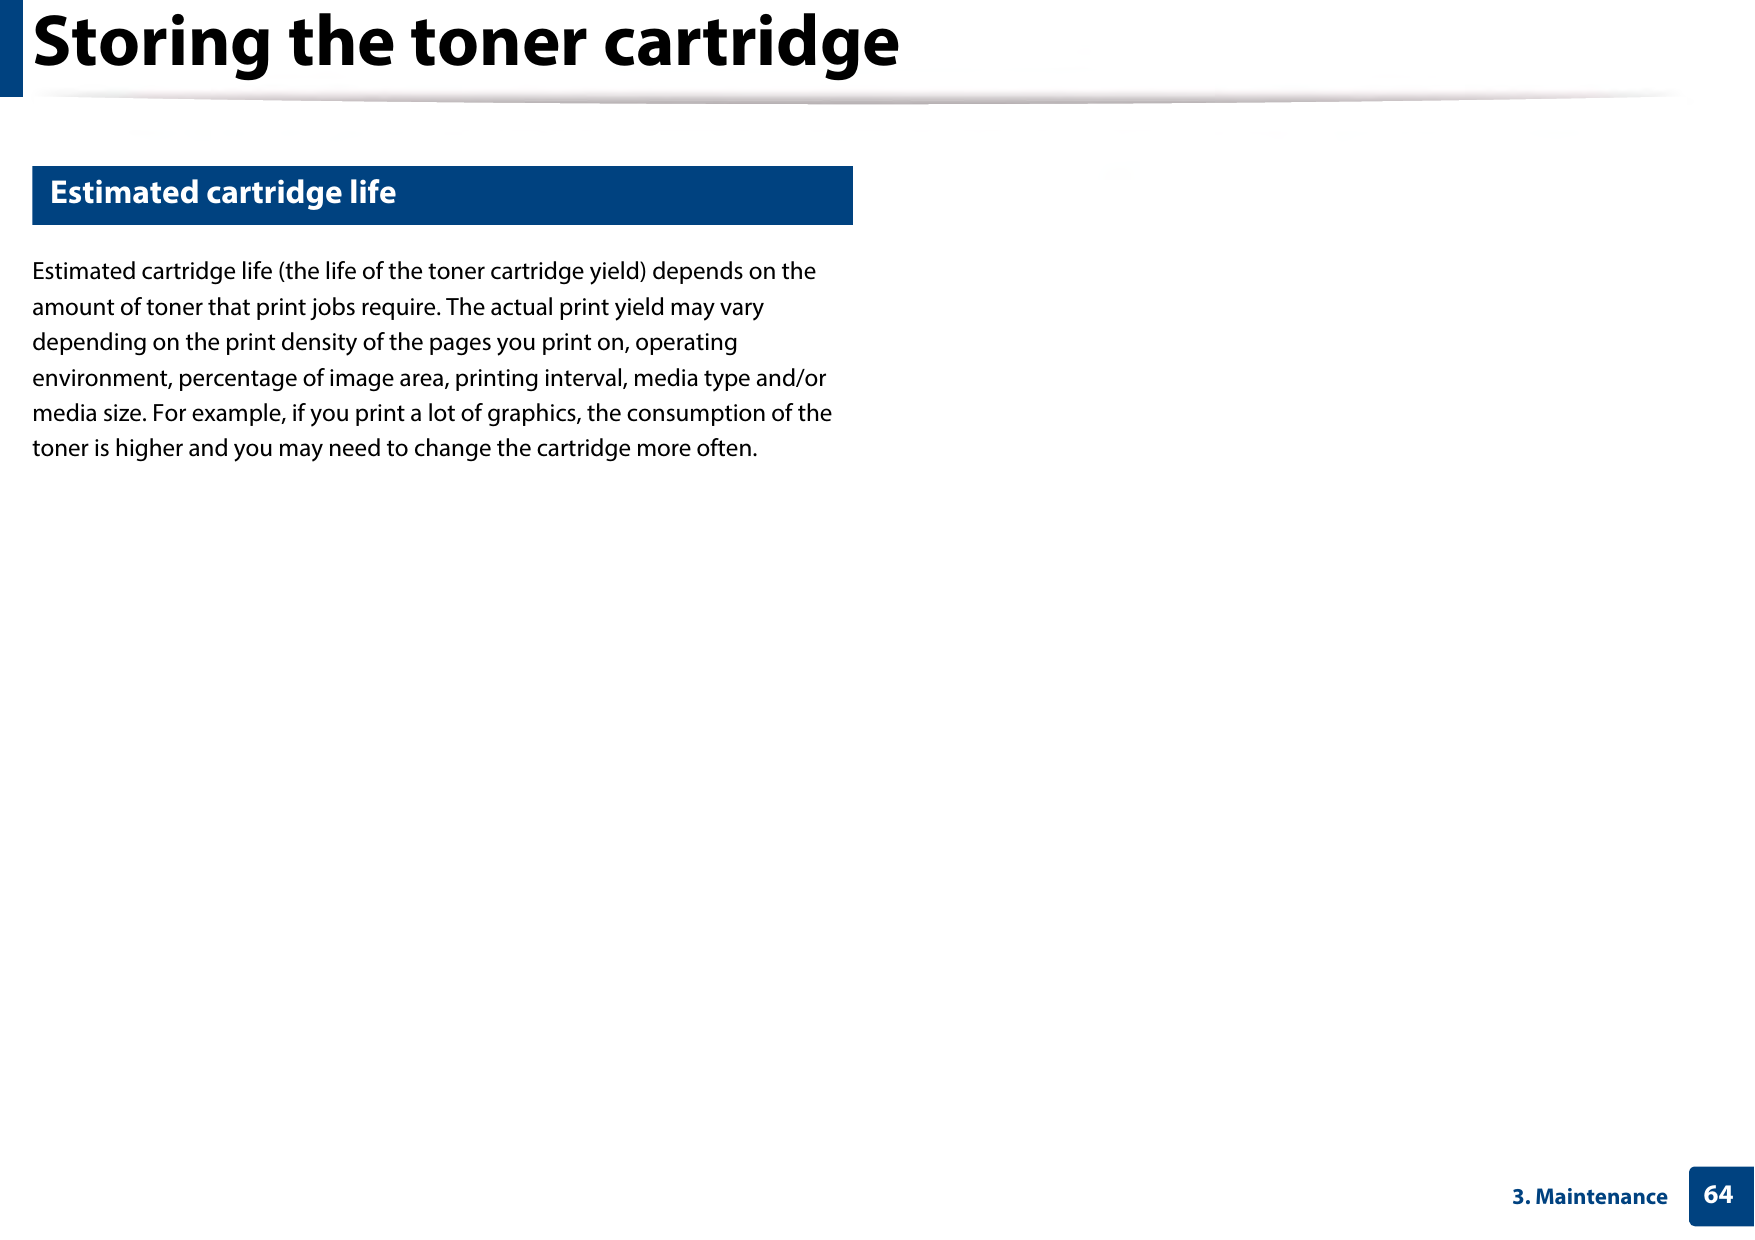 Storing the toner cartridge643. Maintenance3 Estimated cartridge lifeEstimated cartridge life (the life of the toner cartridge yield) depends on the amount of toner that print jobs require. The actual print yield may vary depending on the print density of the pages you print on, operating environment, percentage of image area, printing interval, media type and/or media size. For example, if you print a lot of graphics, the consumption of the toner is higher and you may need to change the cartridge more often.